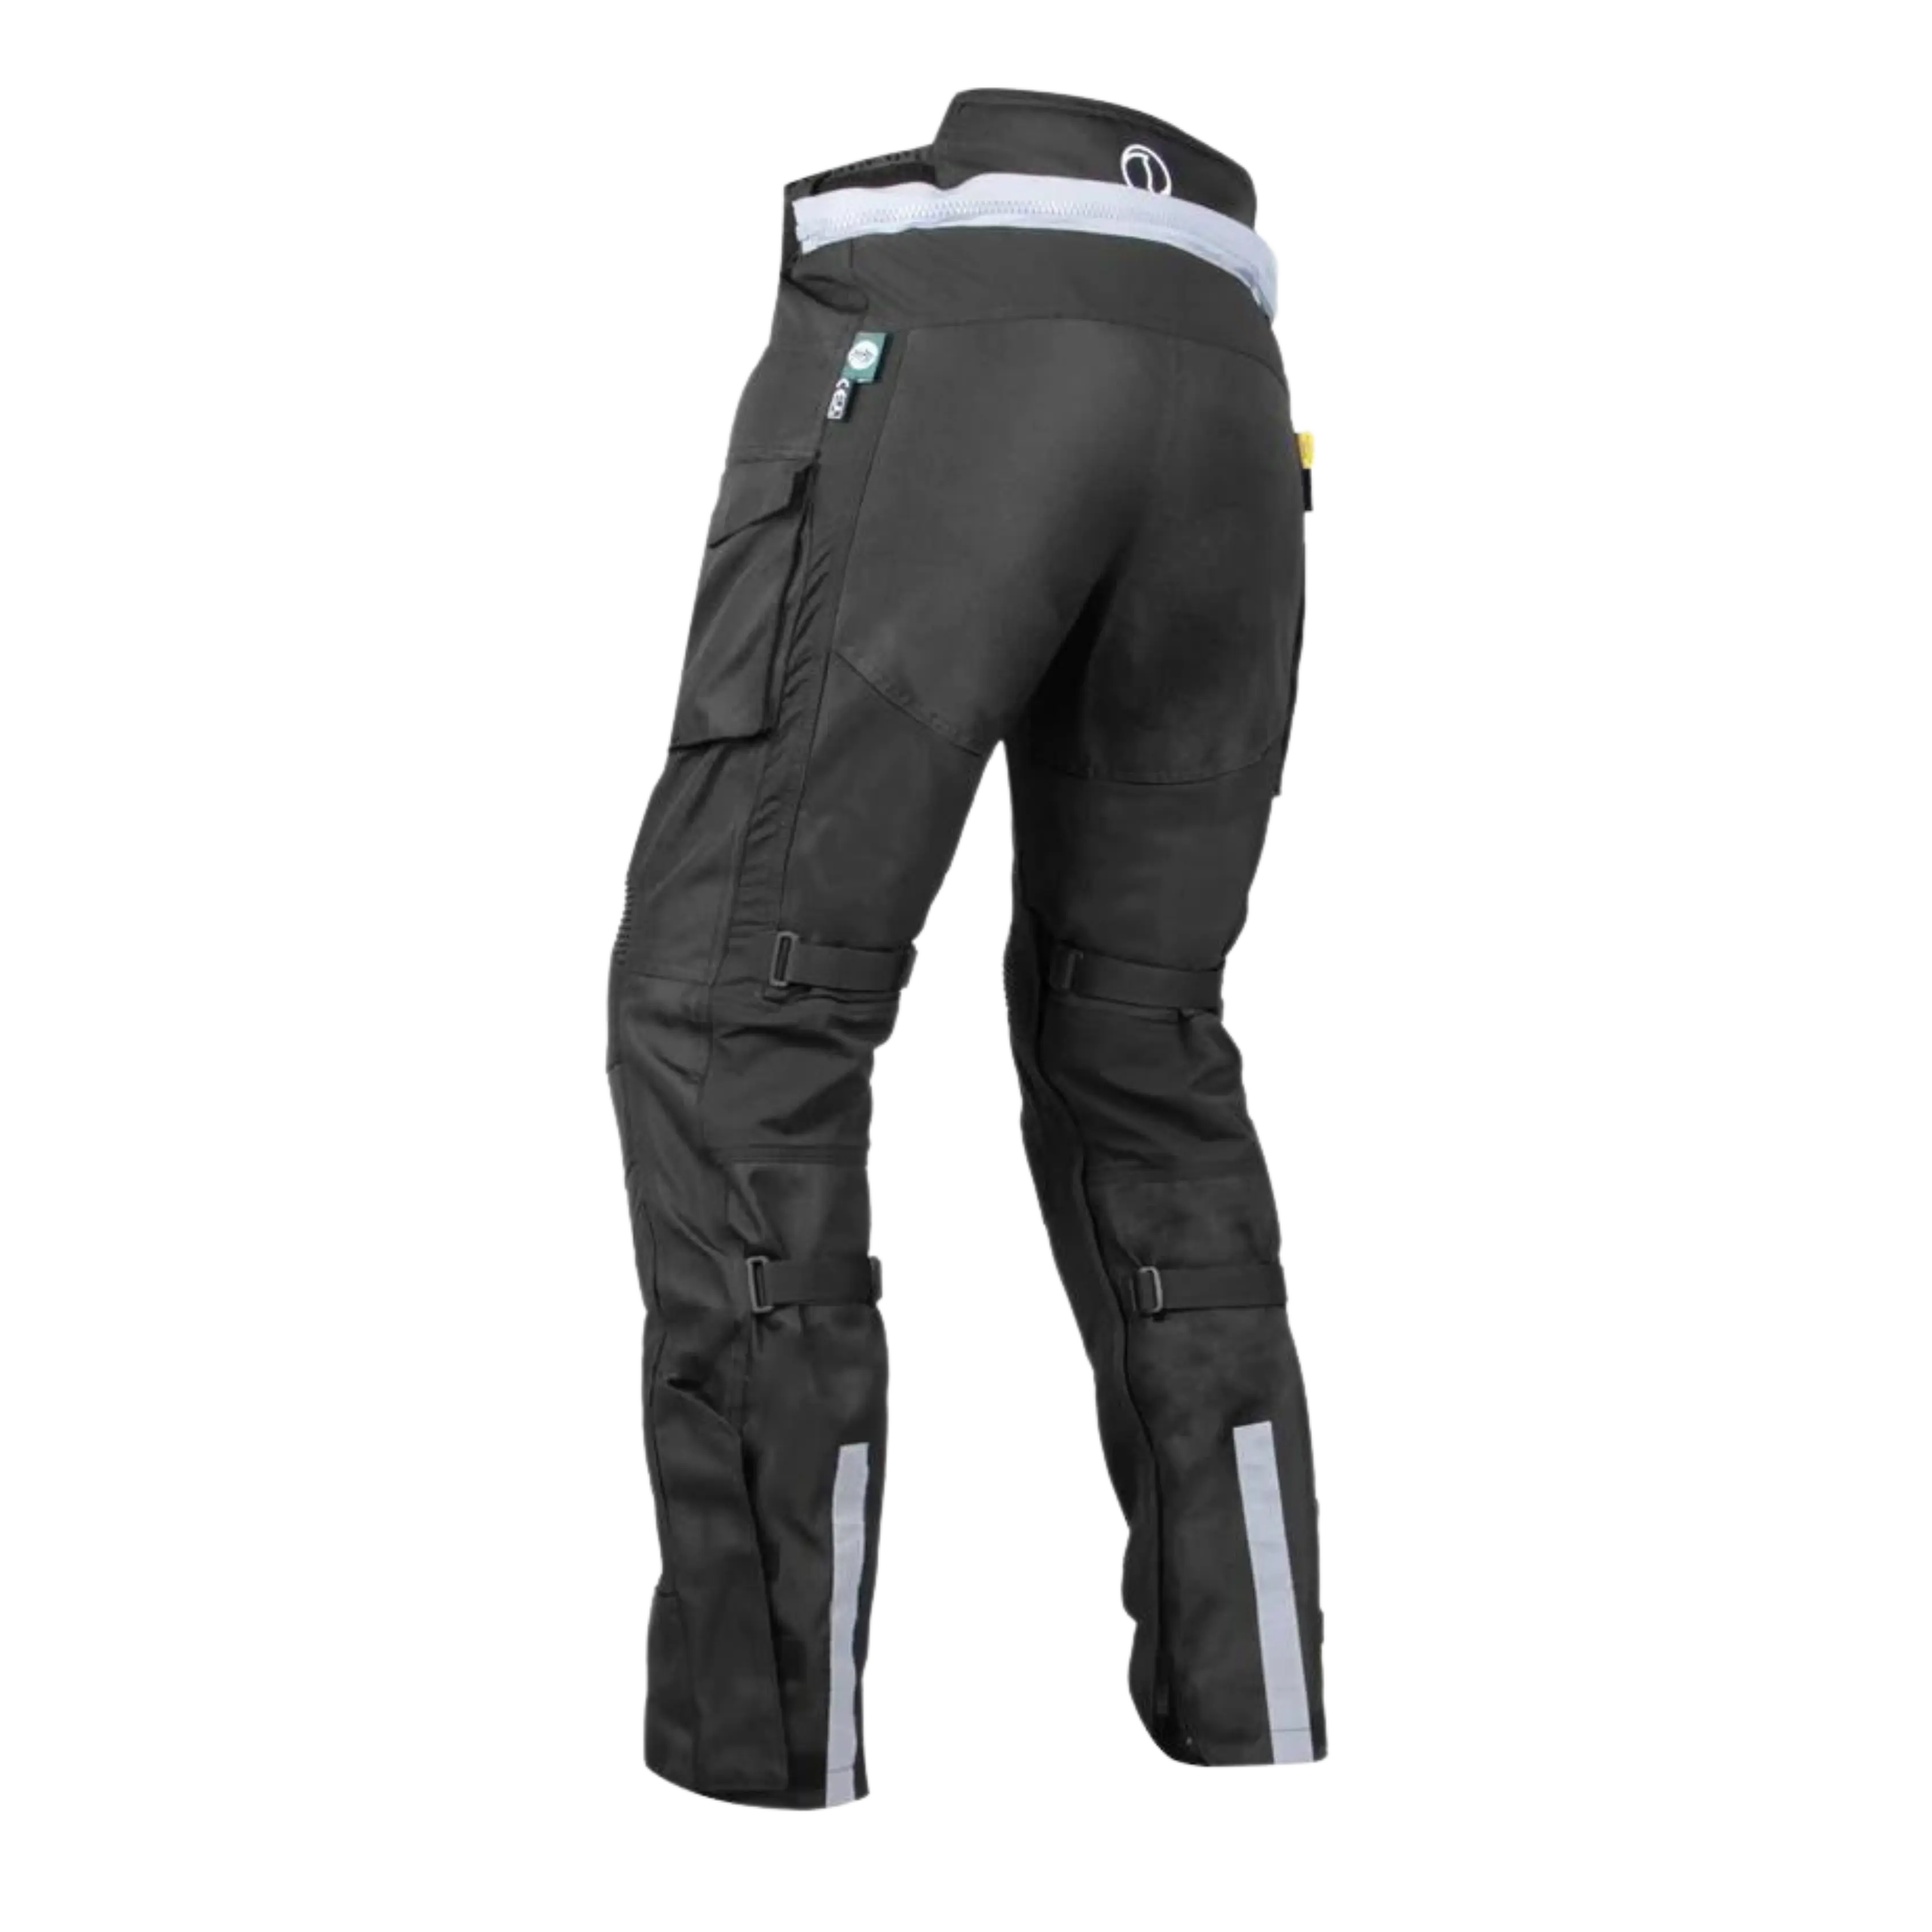 This is an image of Rynox Stealth Air Pro Riding Pants on rent offered by SharePal.in